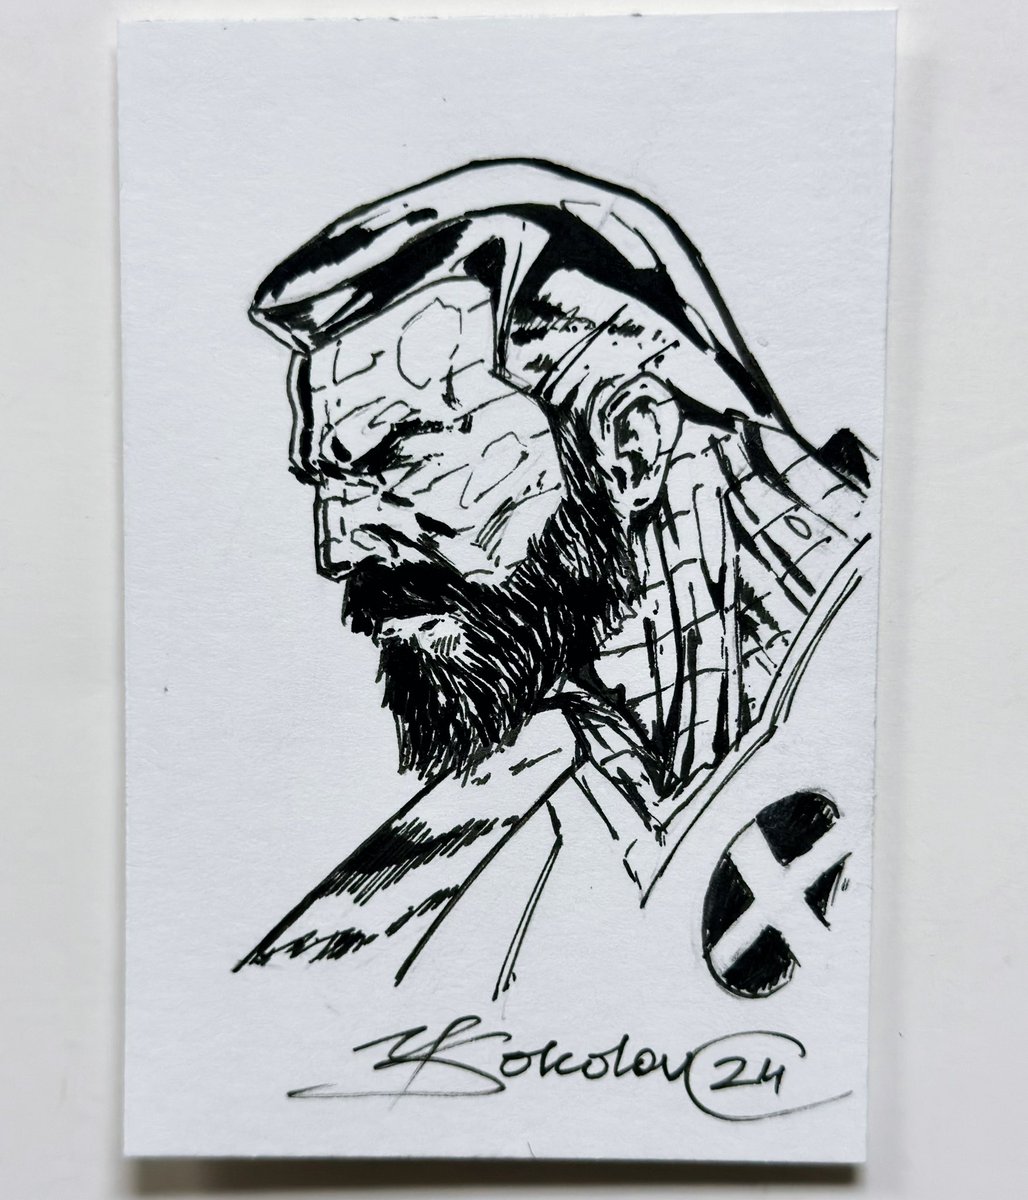 My first ever - #sketchcard that I did today. 
COLOSSUS
Ink over pencil on 3.75x2.5” smooth bristol card
#colossus #drawing #inking #comics #tradingcard @marvel